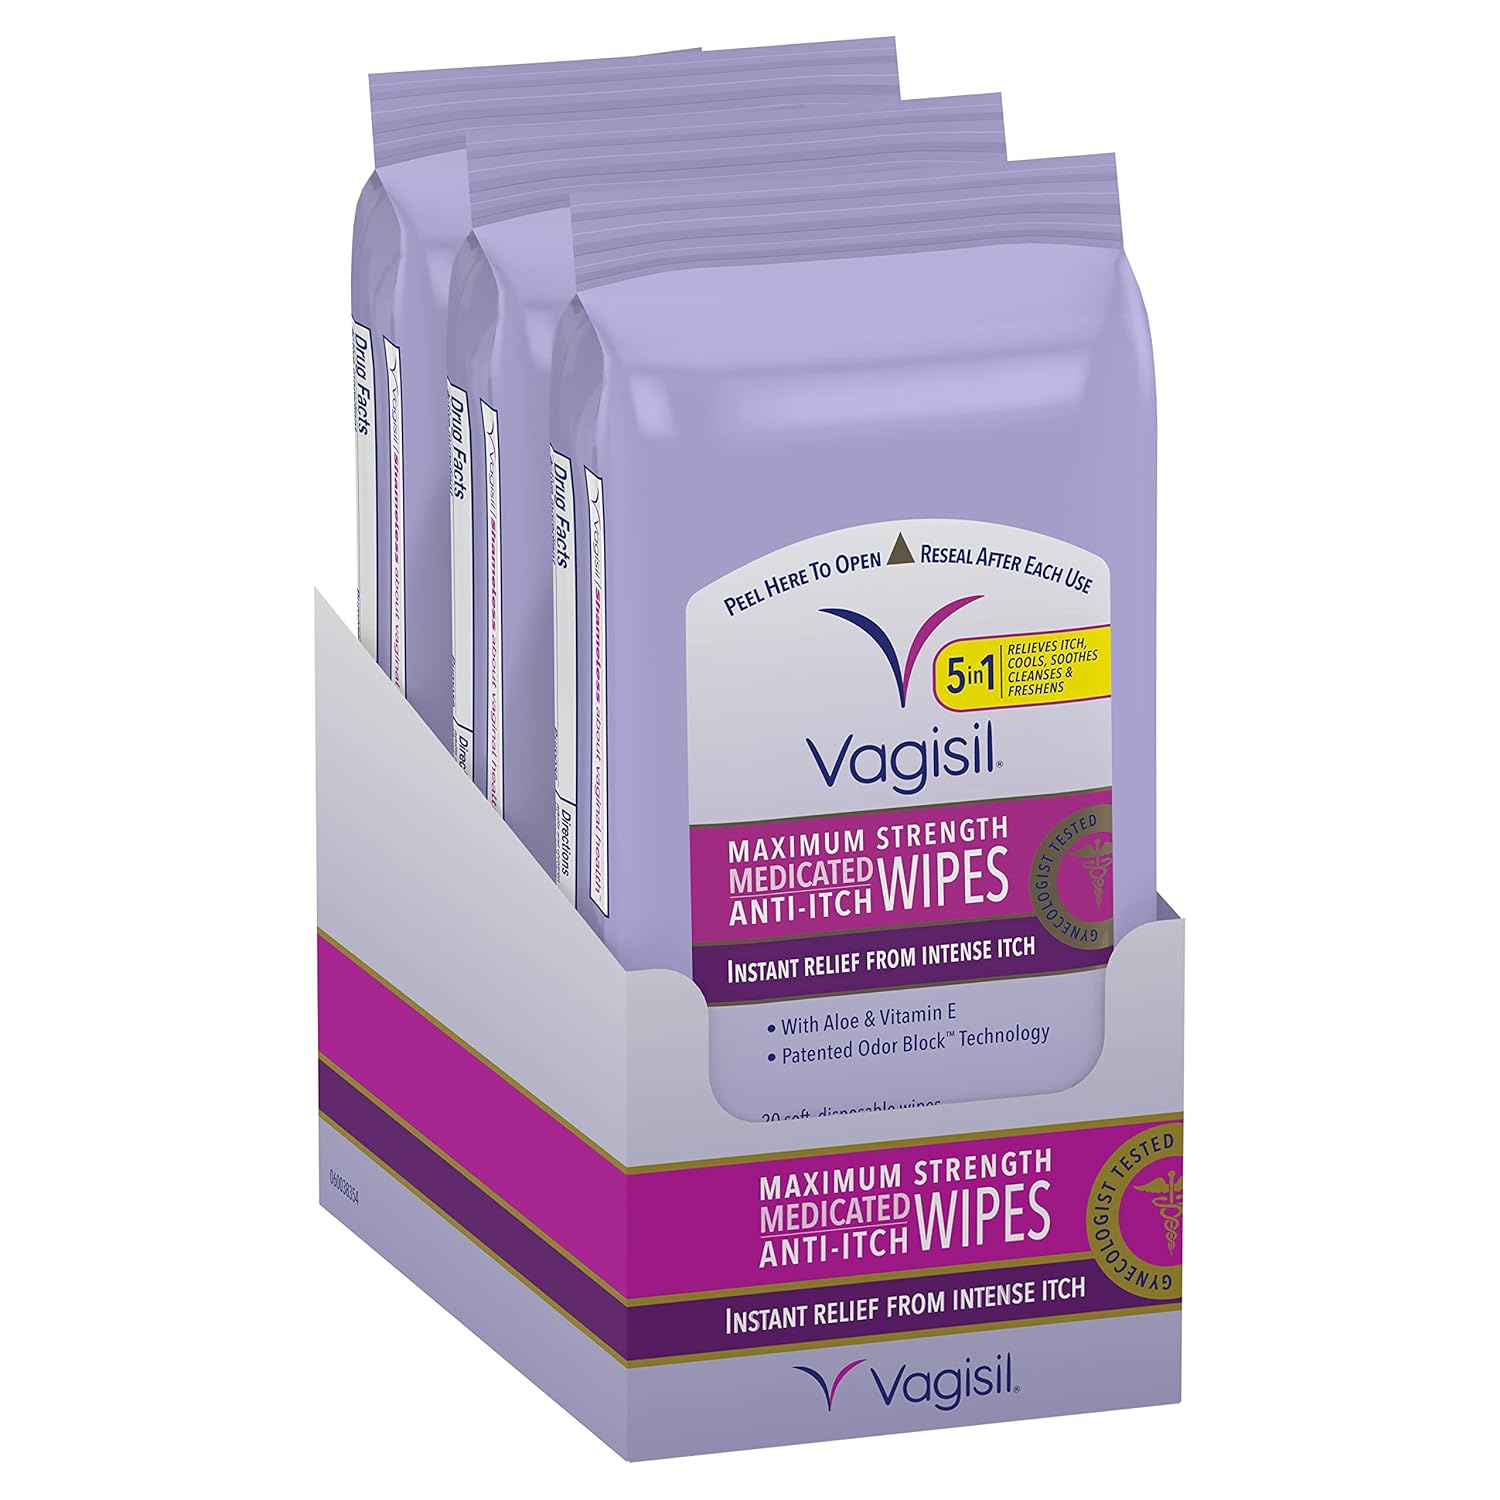 Vagisil Wipes, Anti-Itch Medicated Feminine Vaginal Wipes, Maximum Strength, Instant Relief, 20 Wipes (Pack of 3)